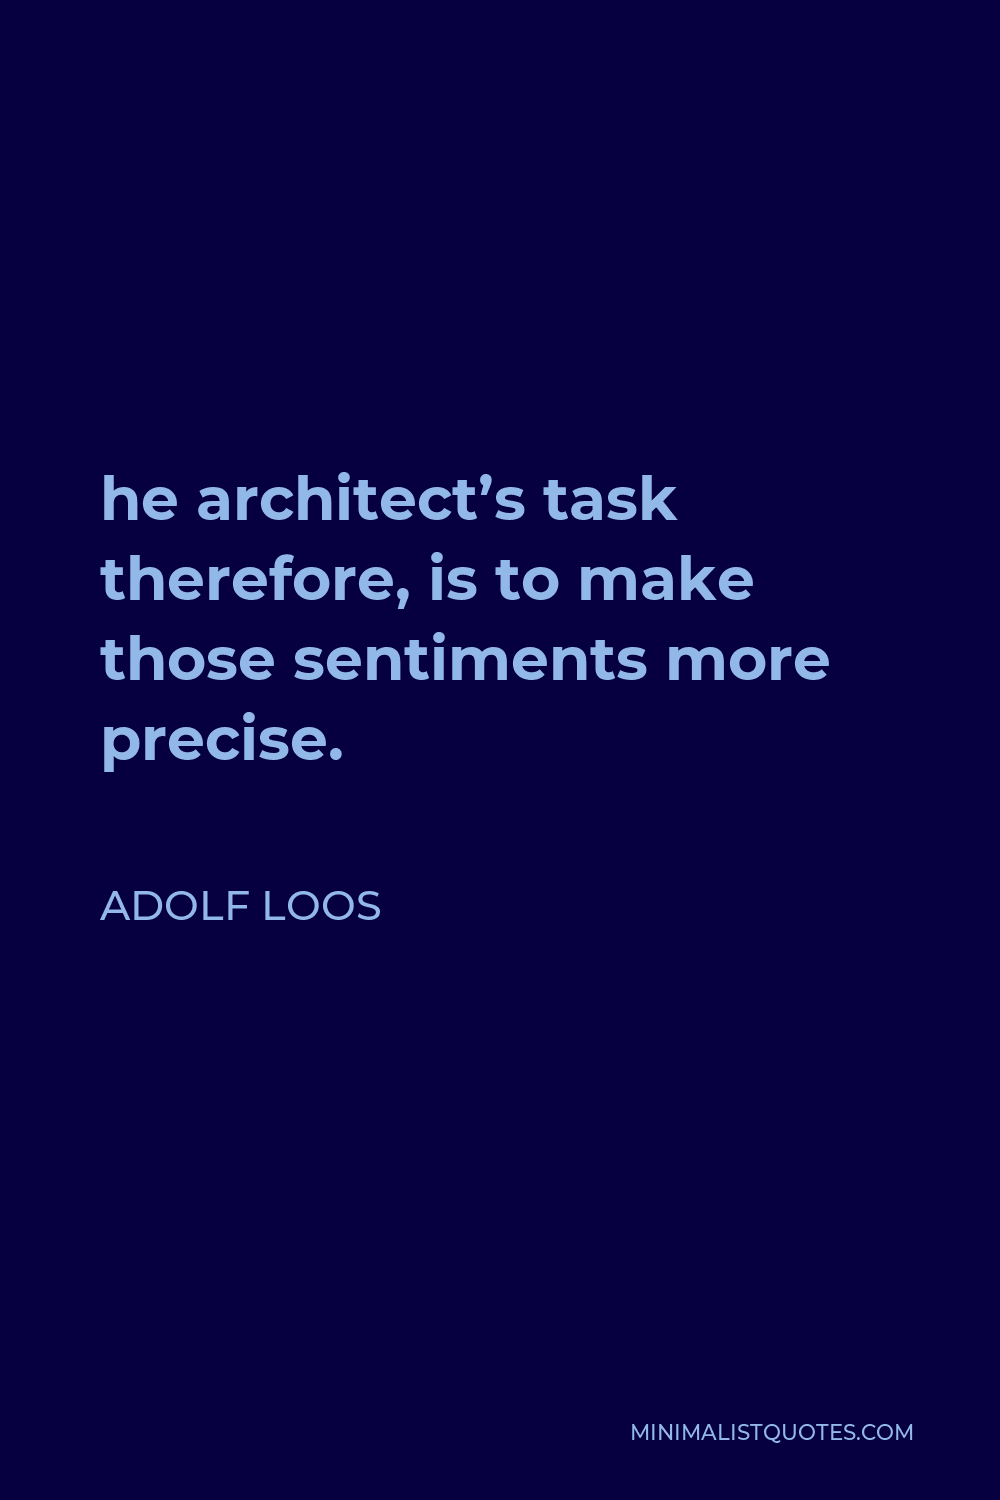 Adolf Loos Quote - he architect’s task therefore, is to make those sentiments more precise.